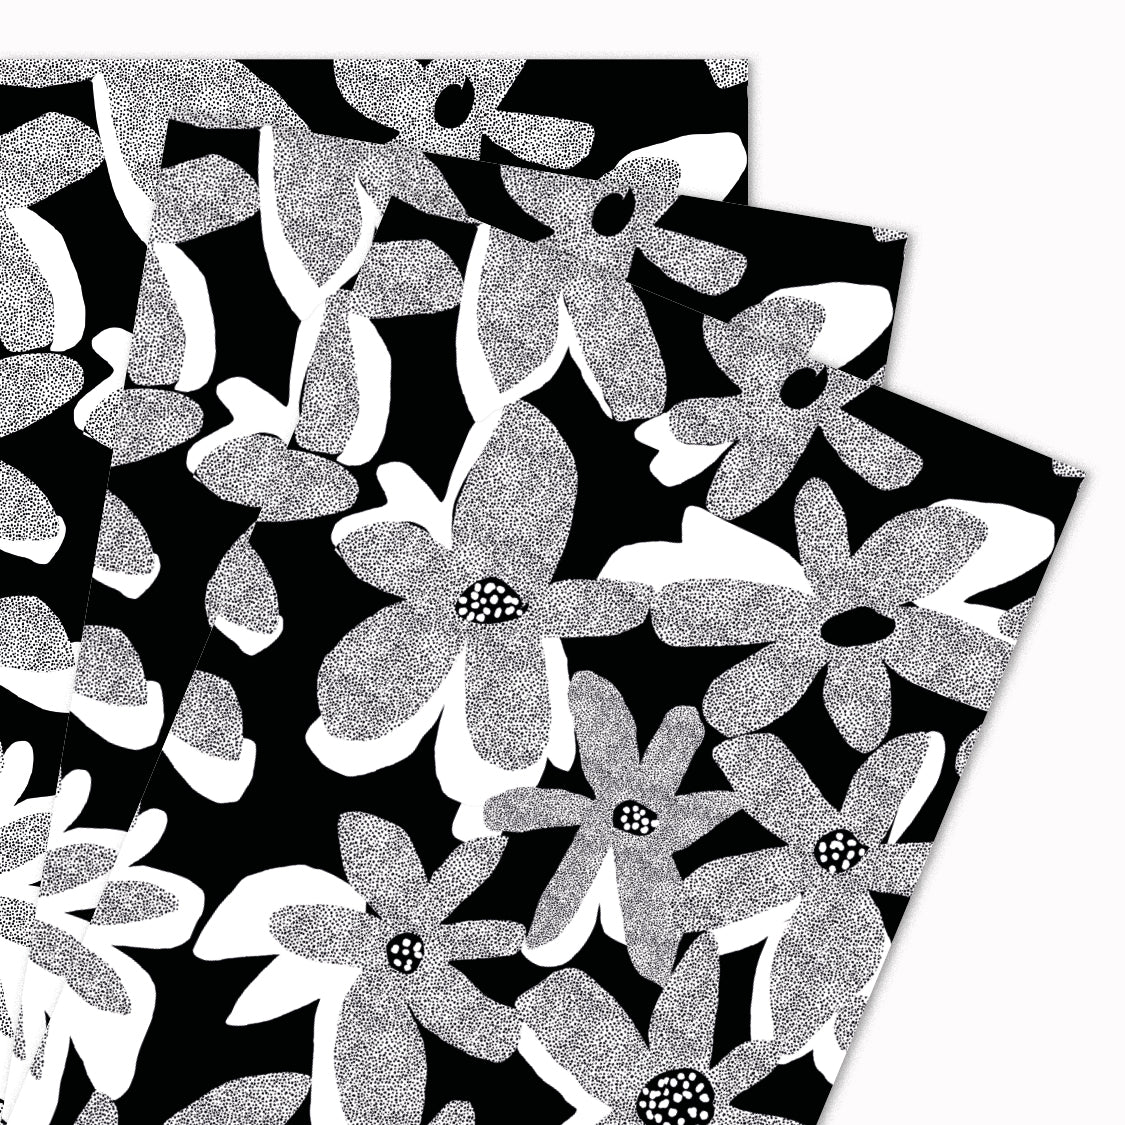 Pack of 3 'Dark Bloom' gift wrap sheets illustrated by Katy Welsh for USTUDIO Design. A beautiful, bold floral design in a monochrome colour palette, featuring graphic textured flowers on a black background.